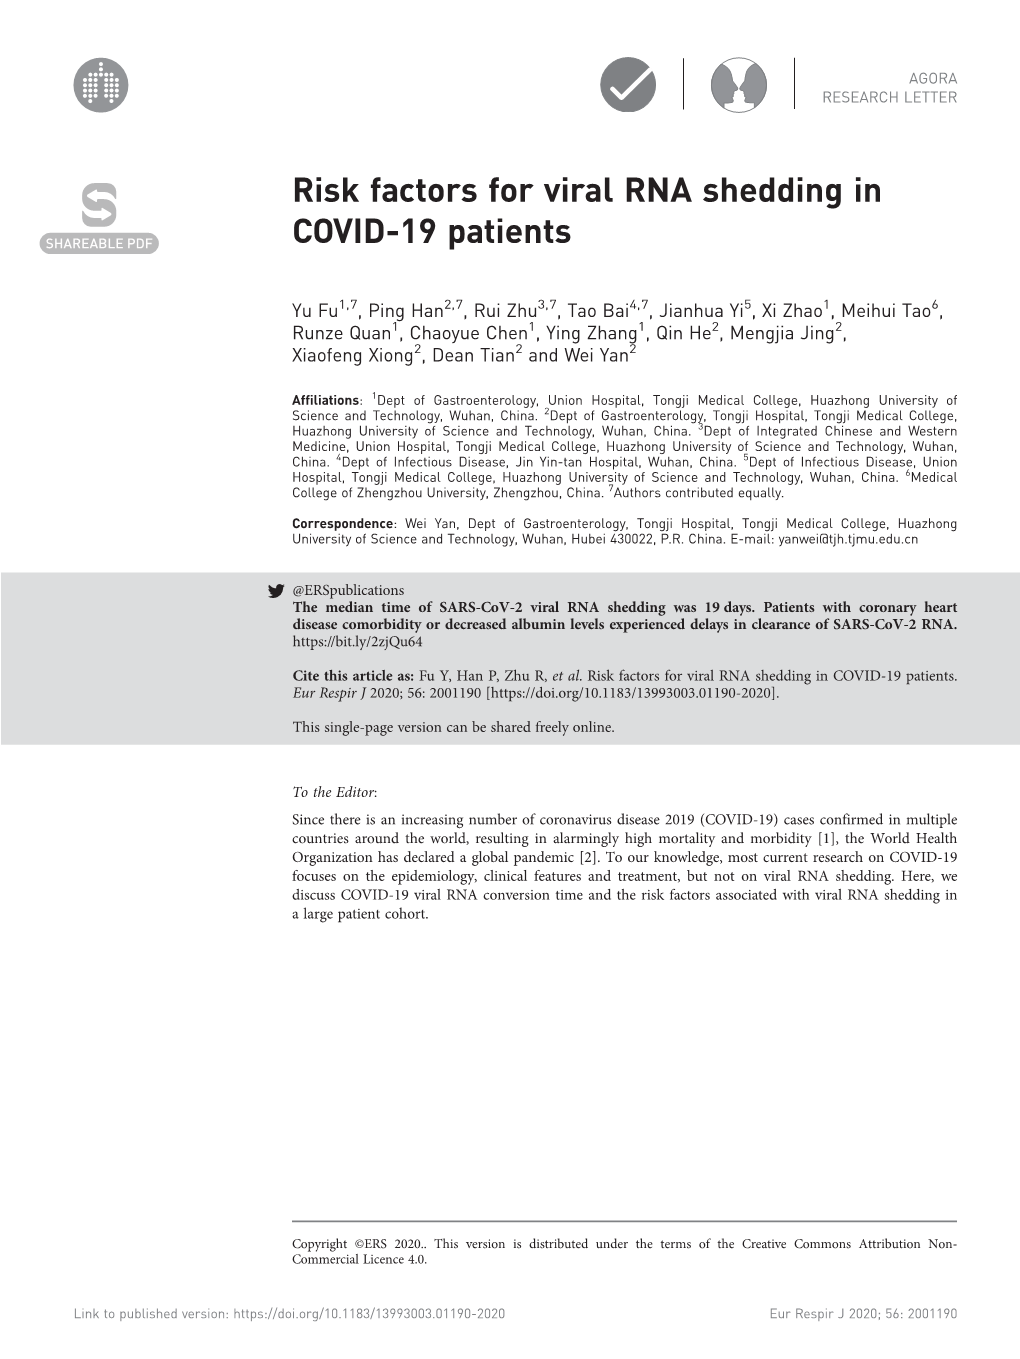 Risk Factors for Viral RNA Shedding in COVID-19 Patients